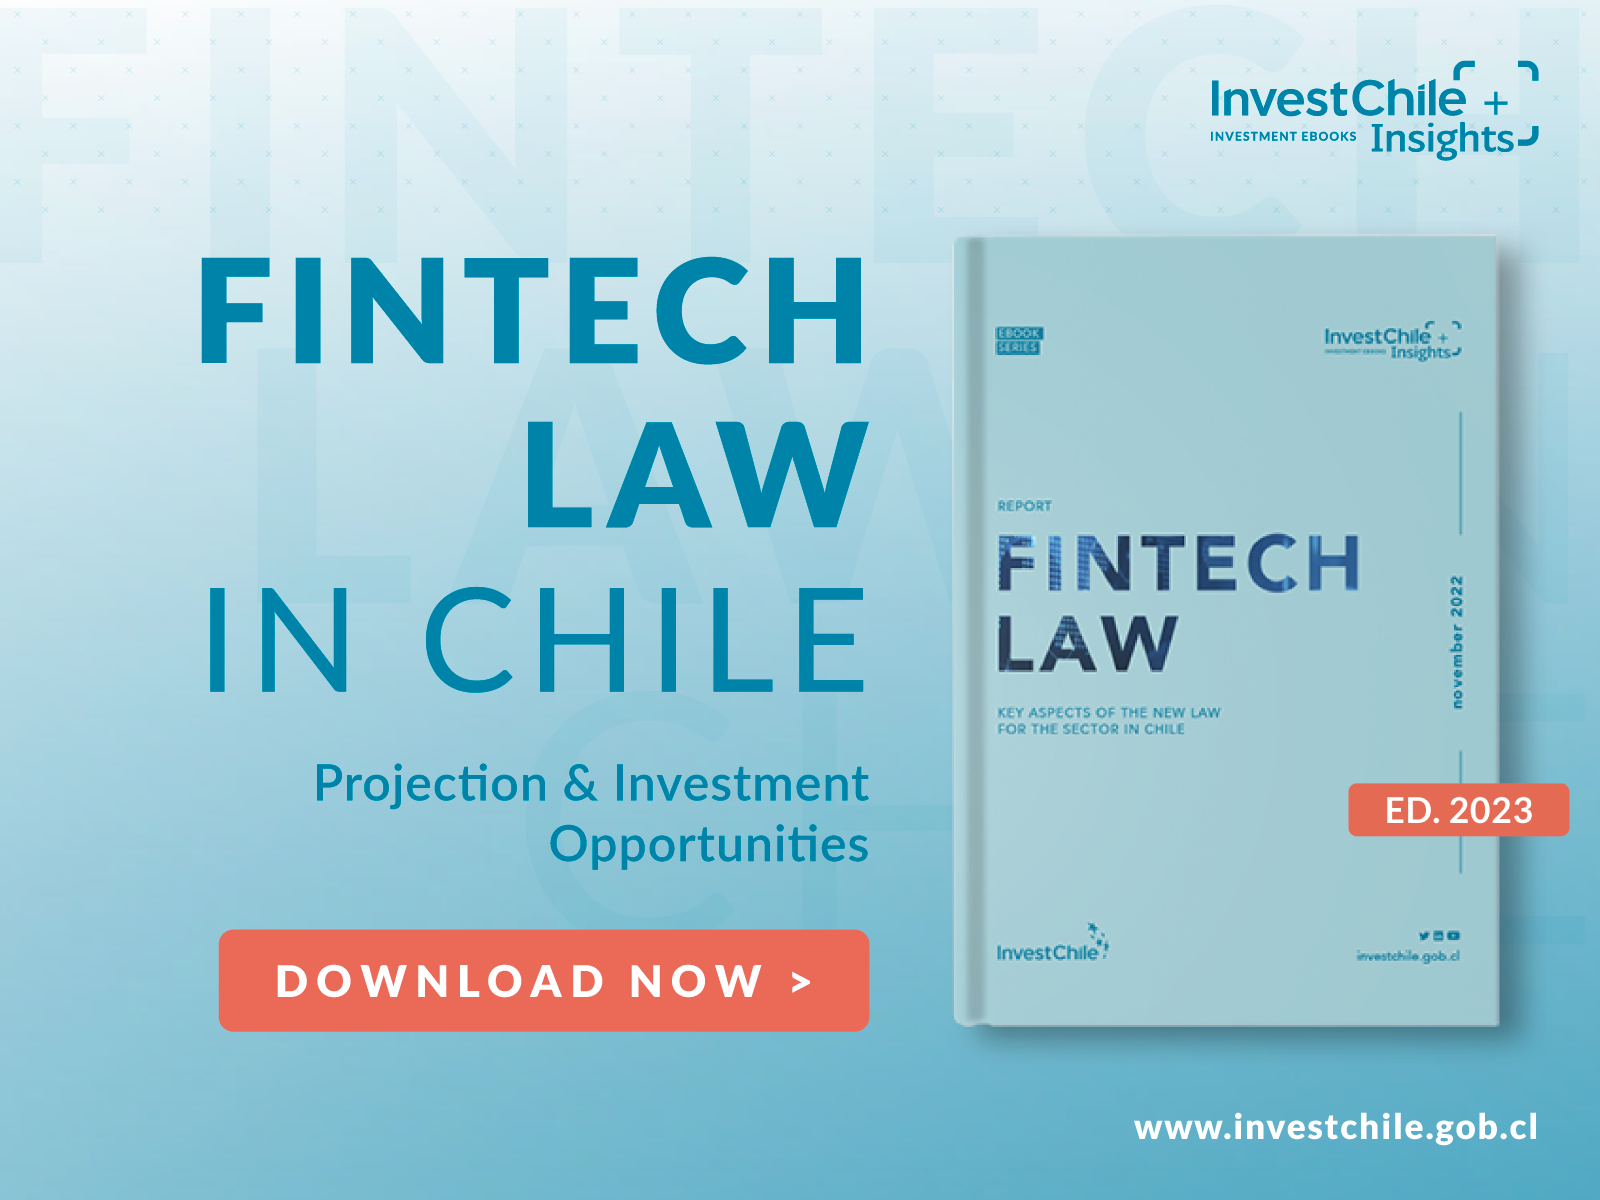 InvestChile Publishes E-Book on New Fintech Law in Chile thumbnail